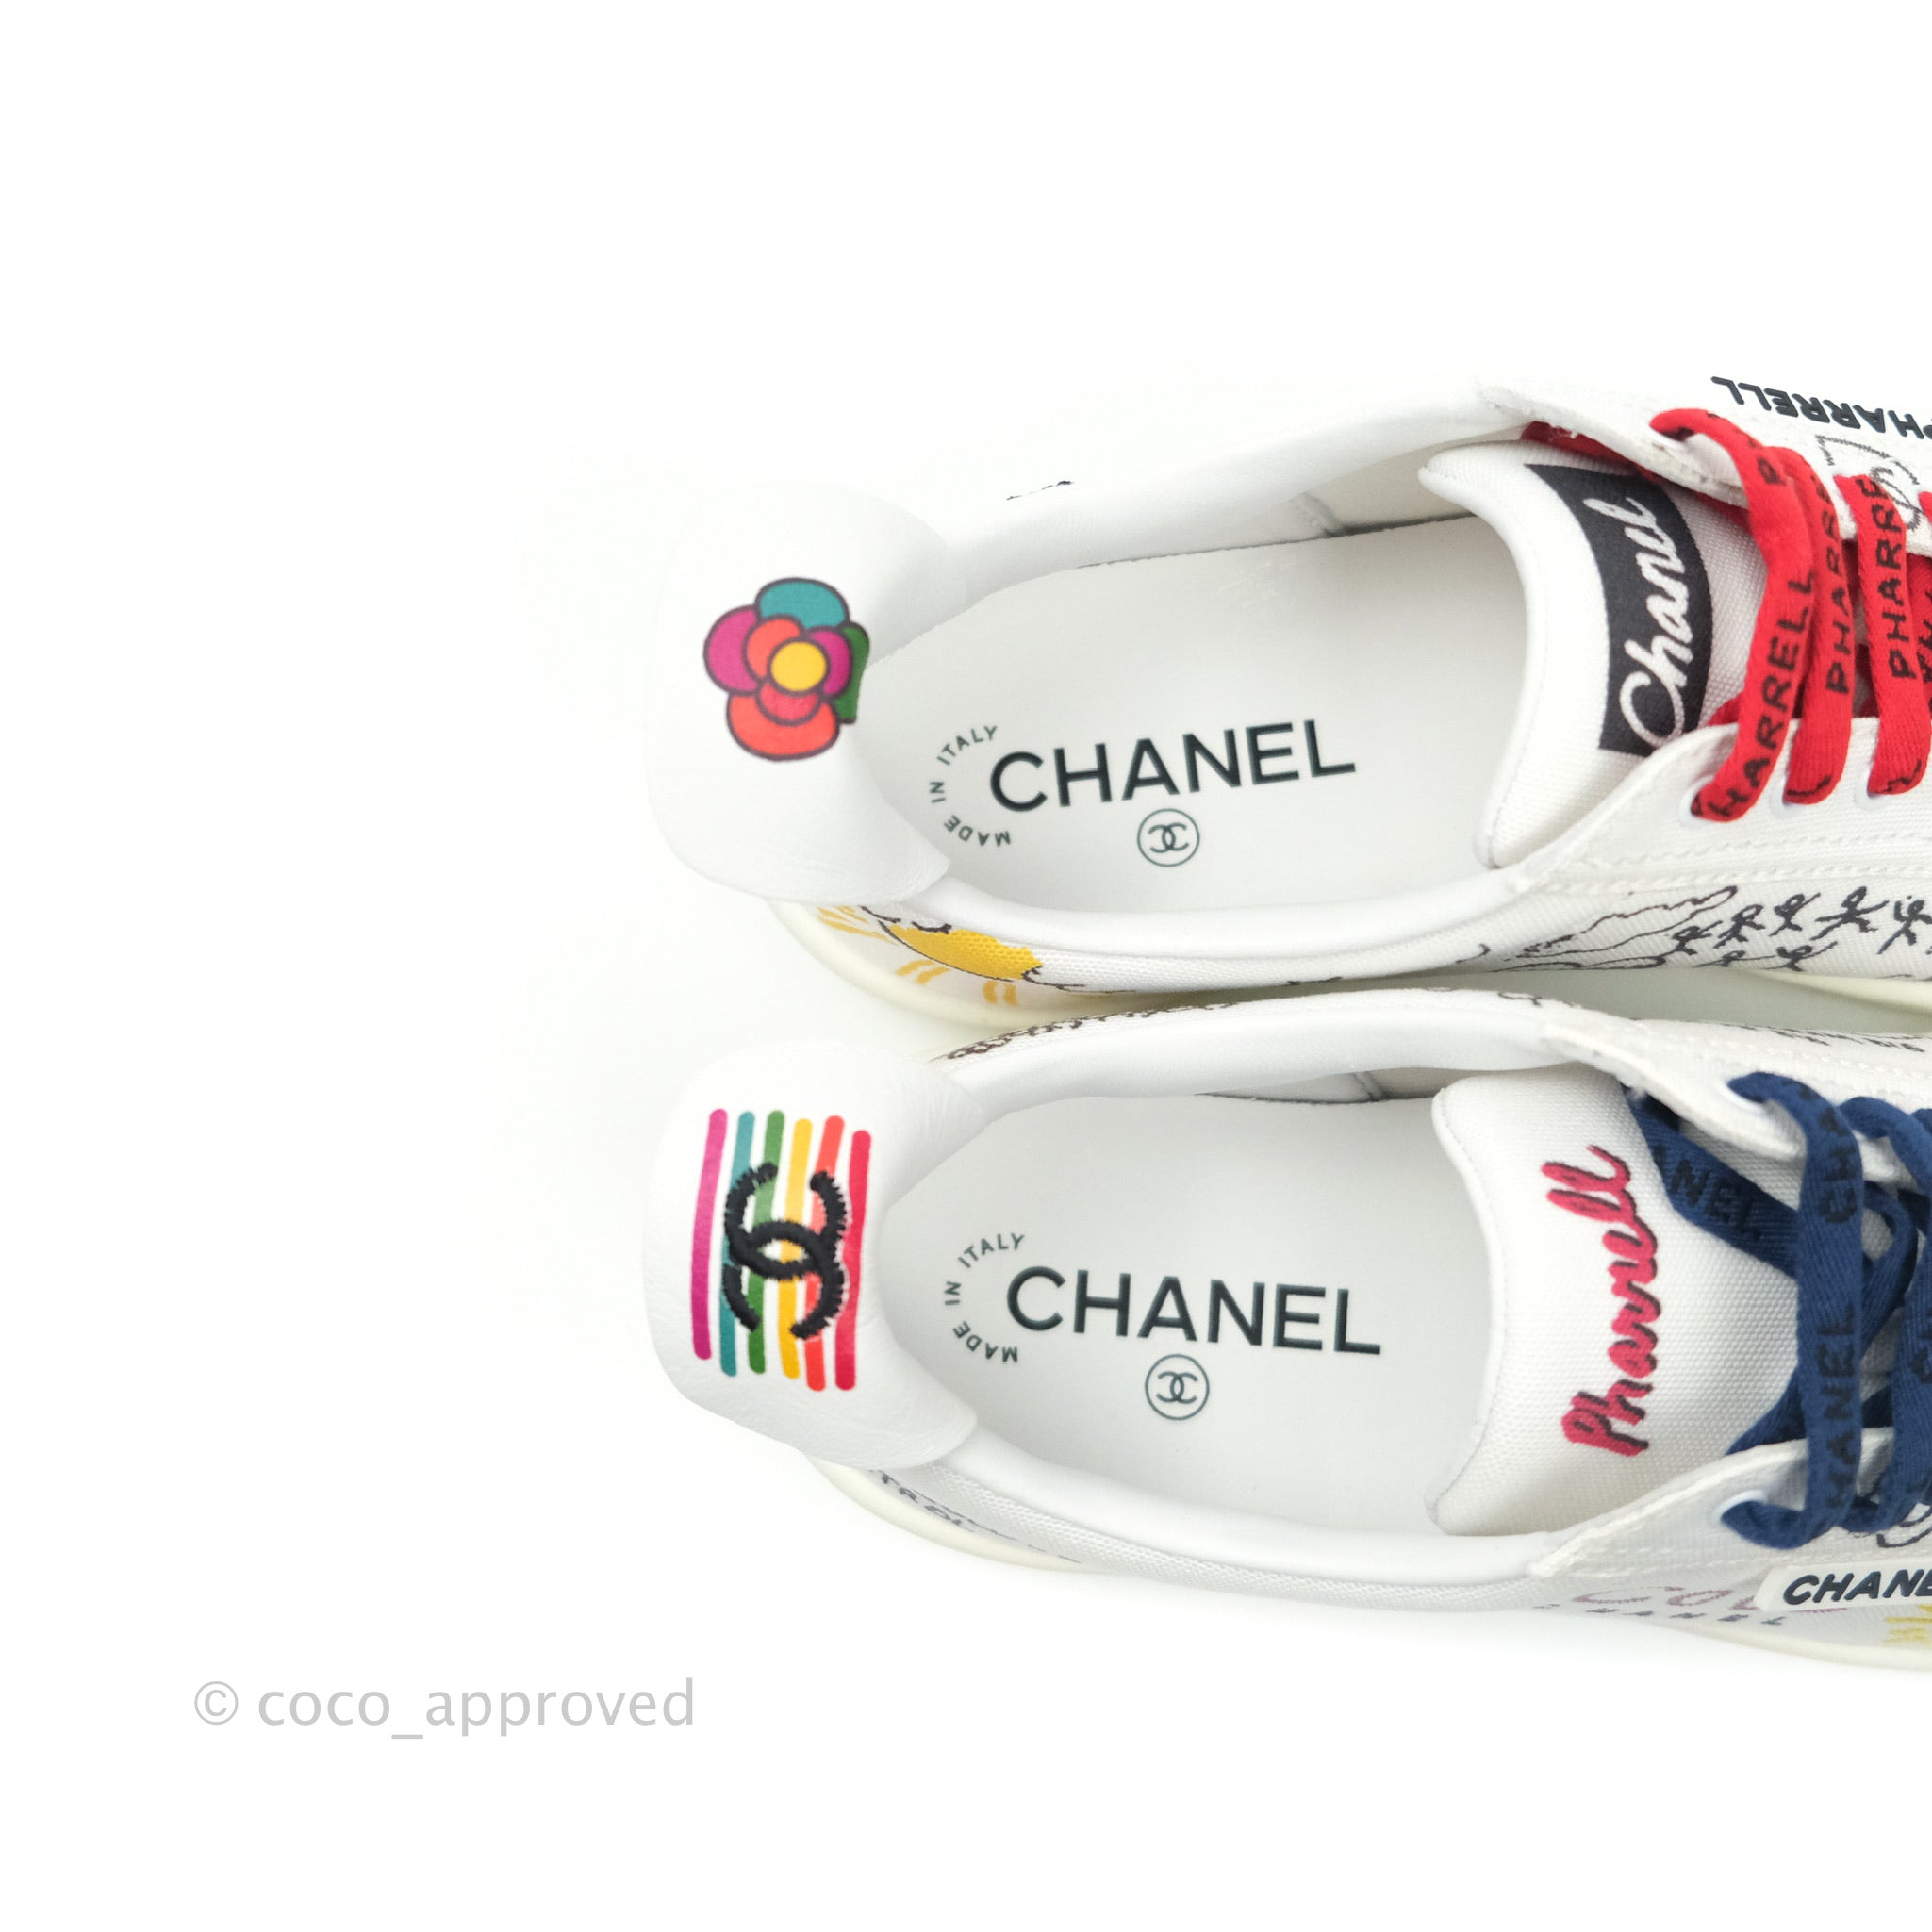 Chanel  X Pharrell White Canvas  Multicolor Low Top Sneaker  VSP  Consignment